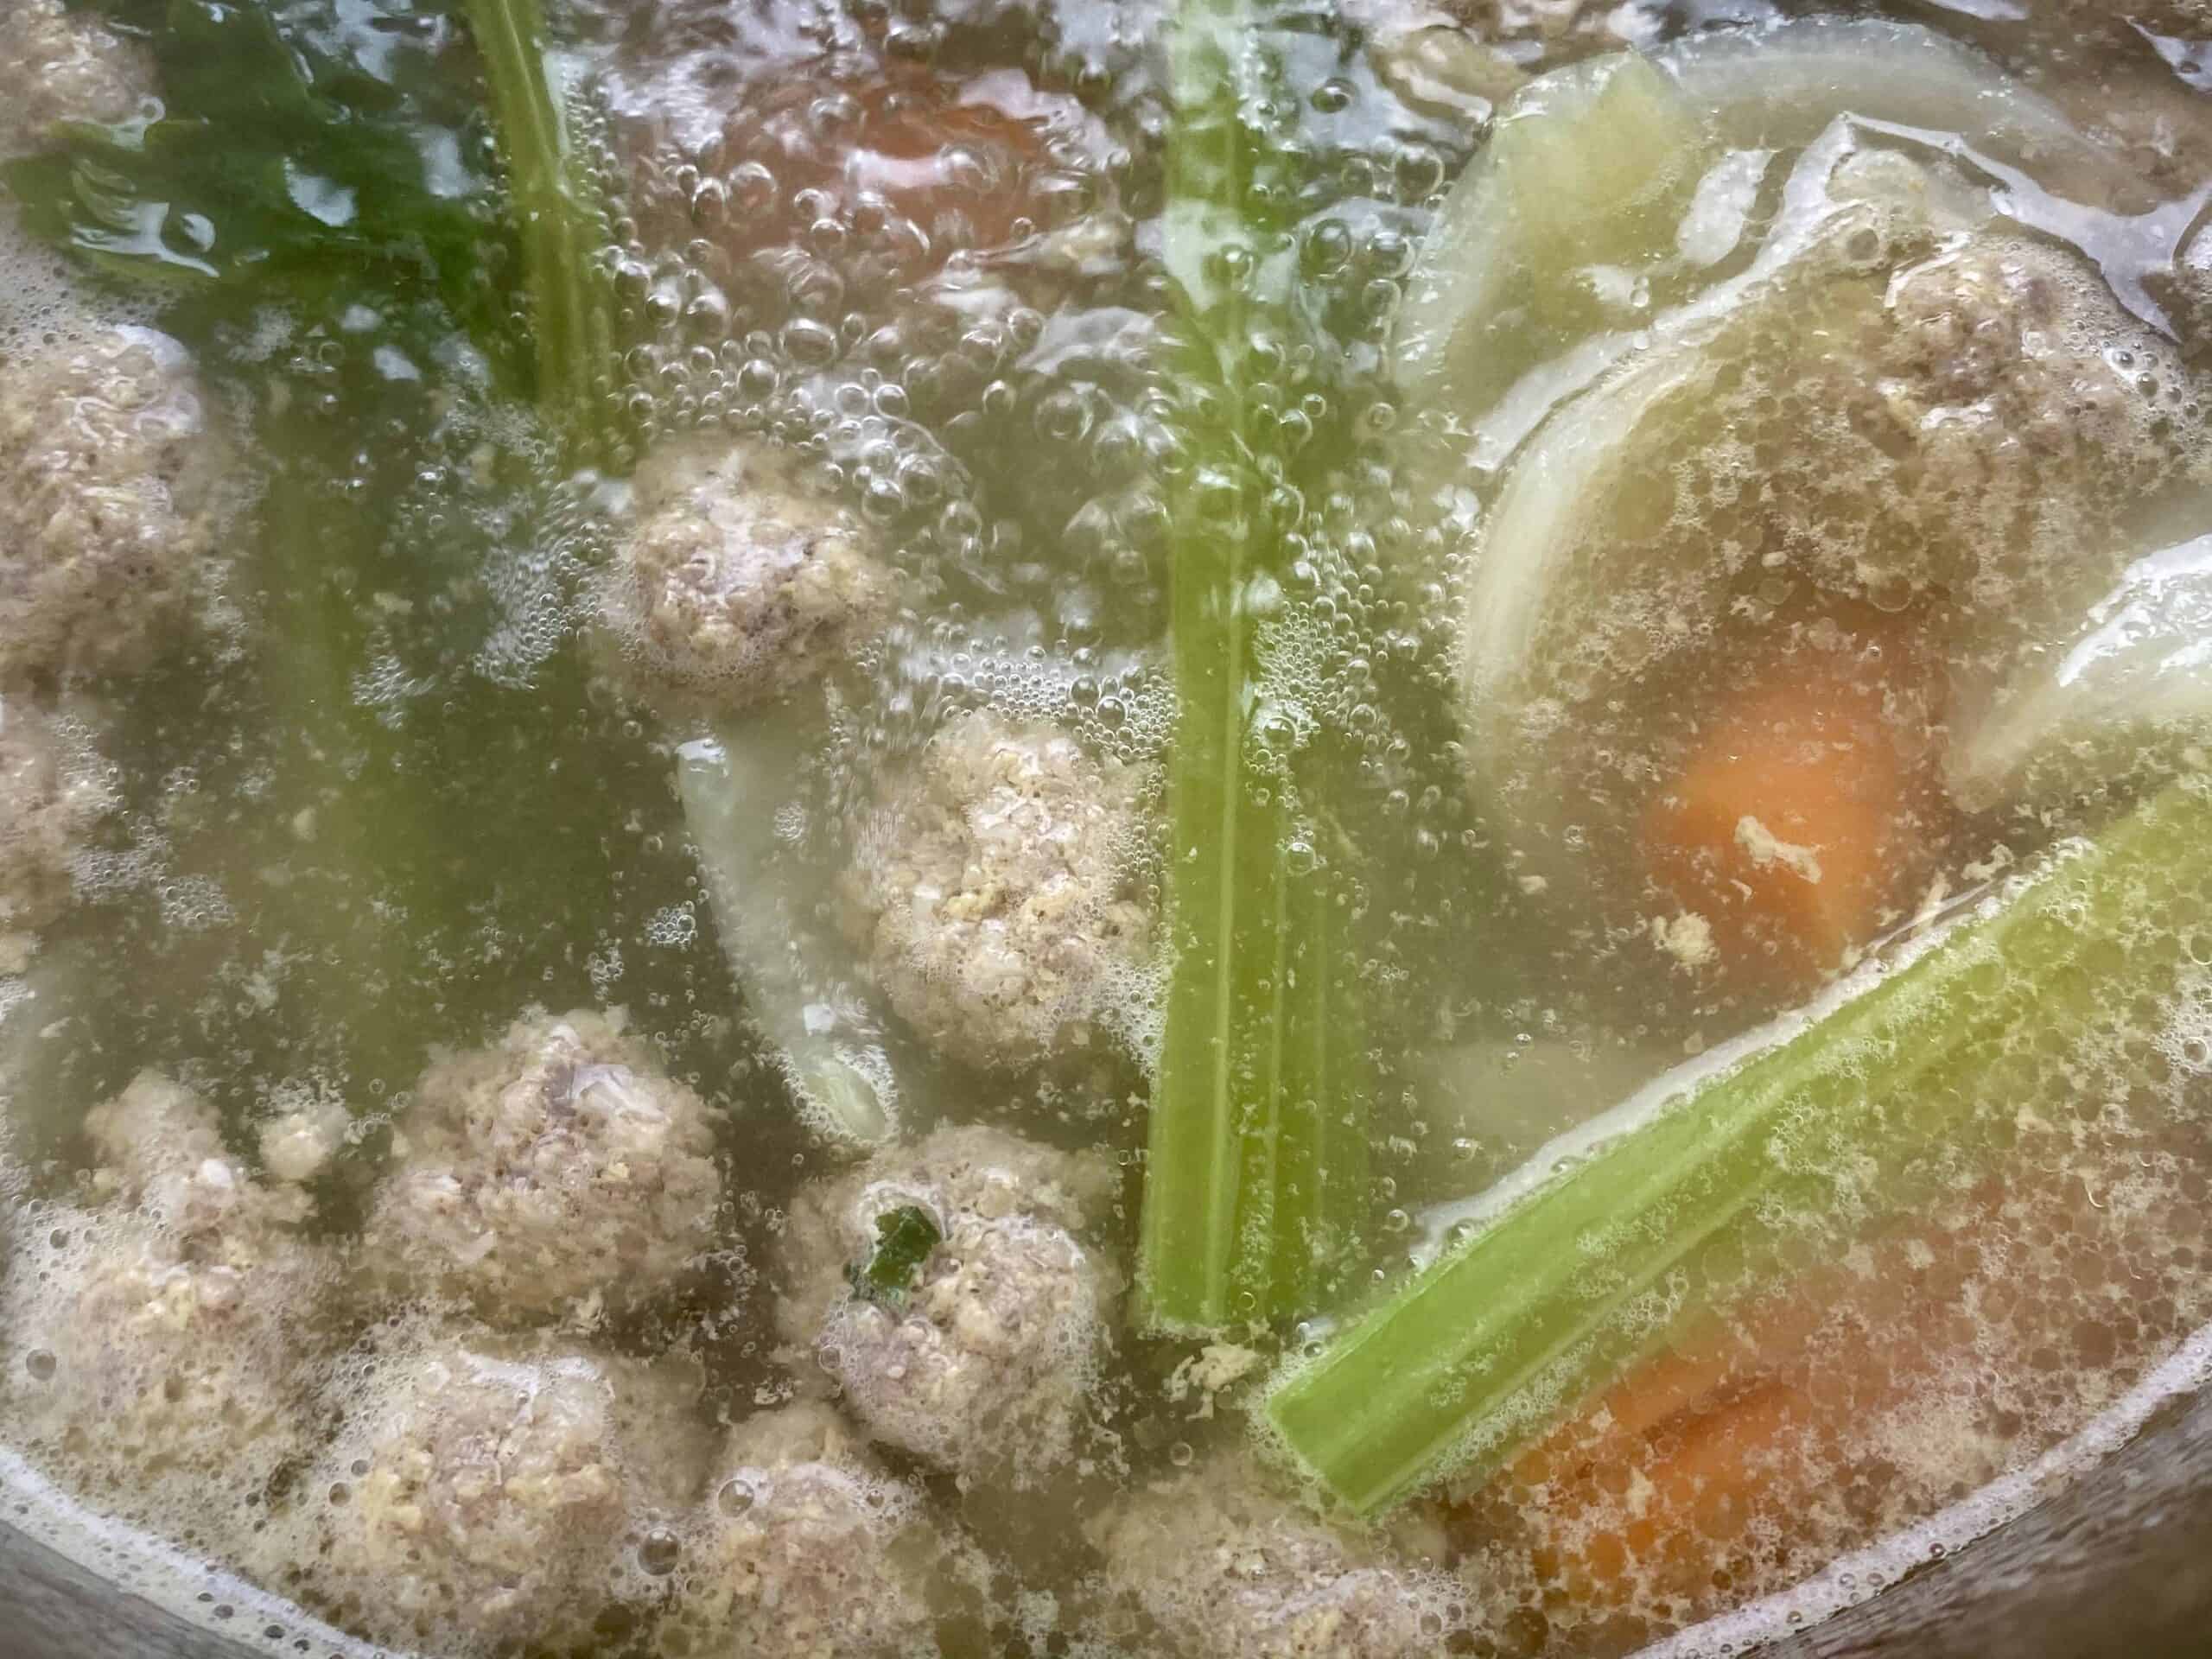 meatballs floating in broth